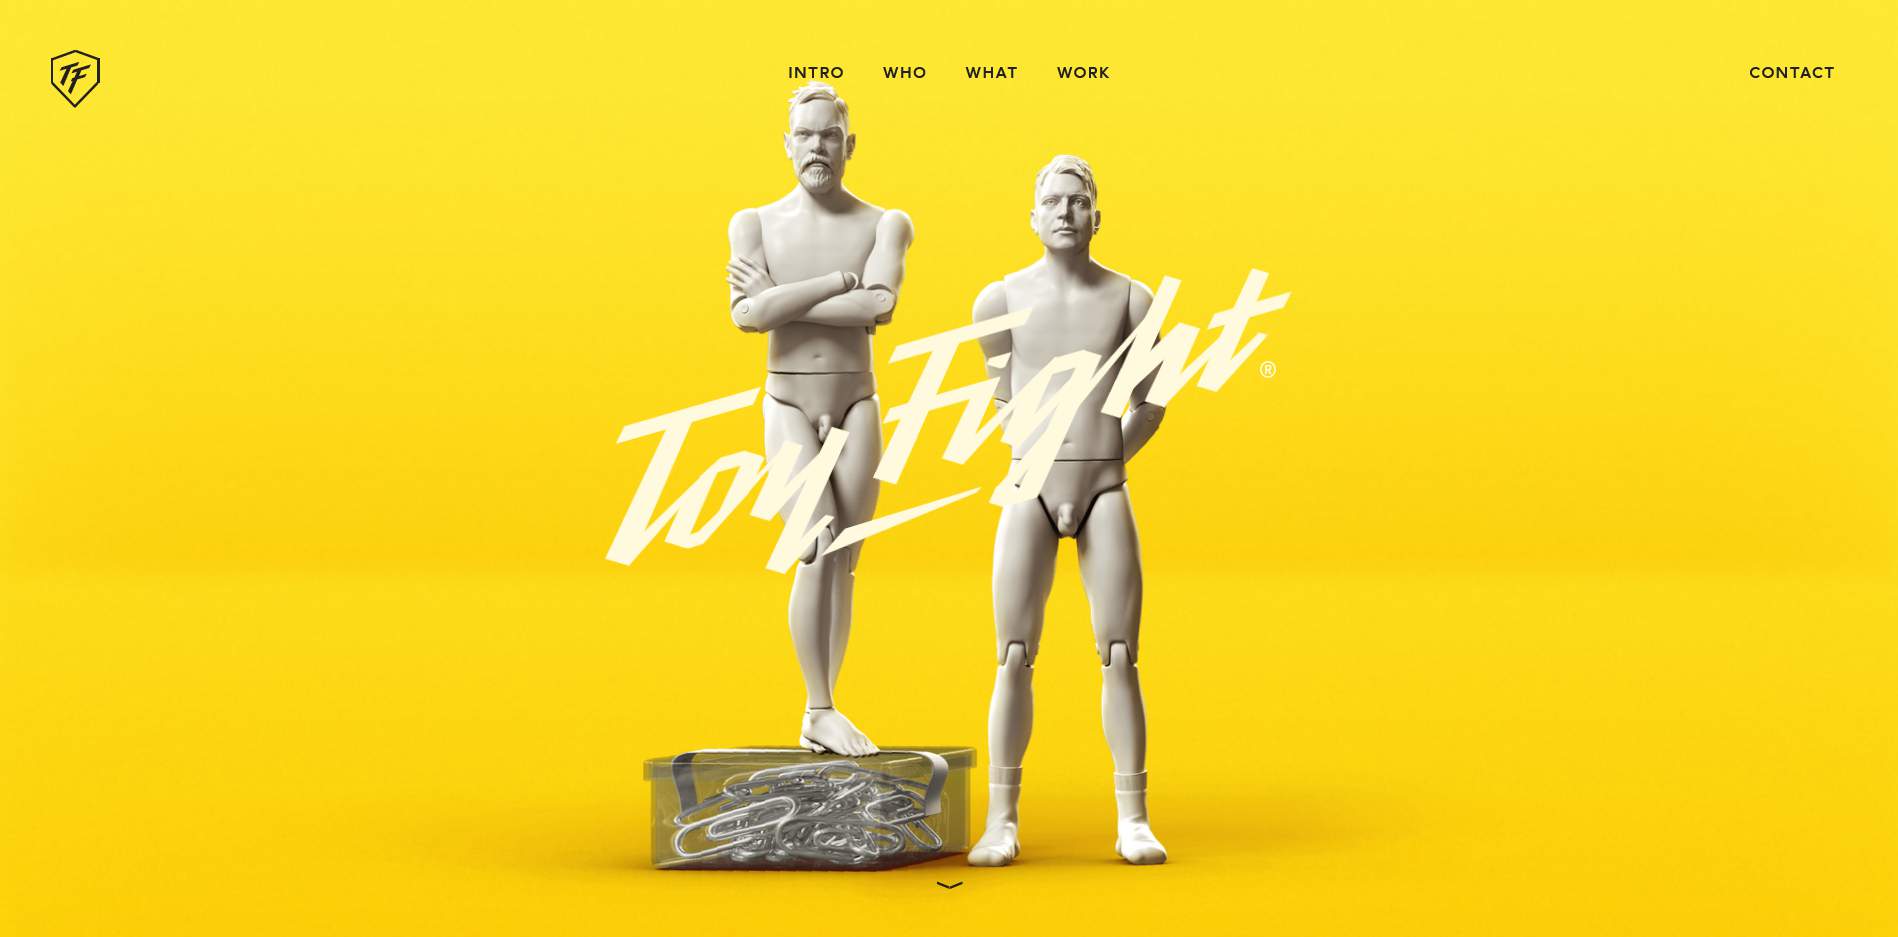 ToyFight homepage, showing off 3D-rendered sculptures of the duo behind the web design company.